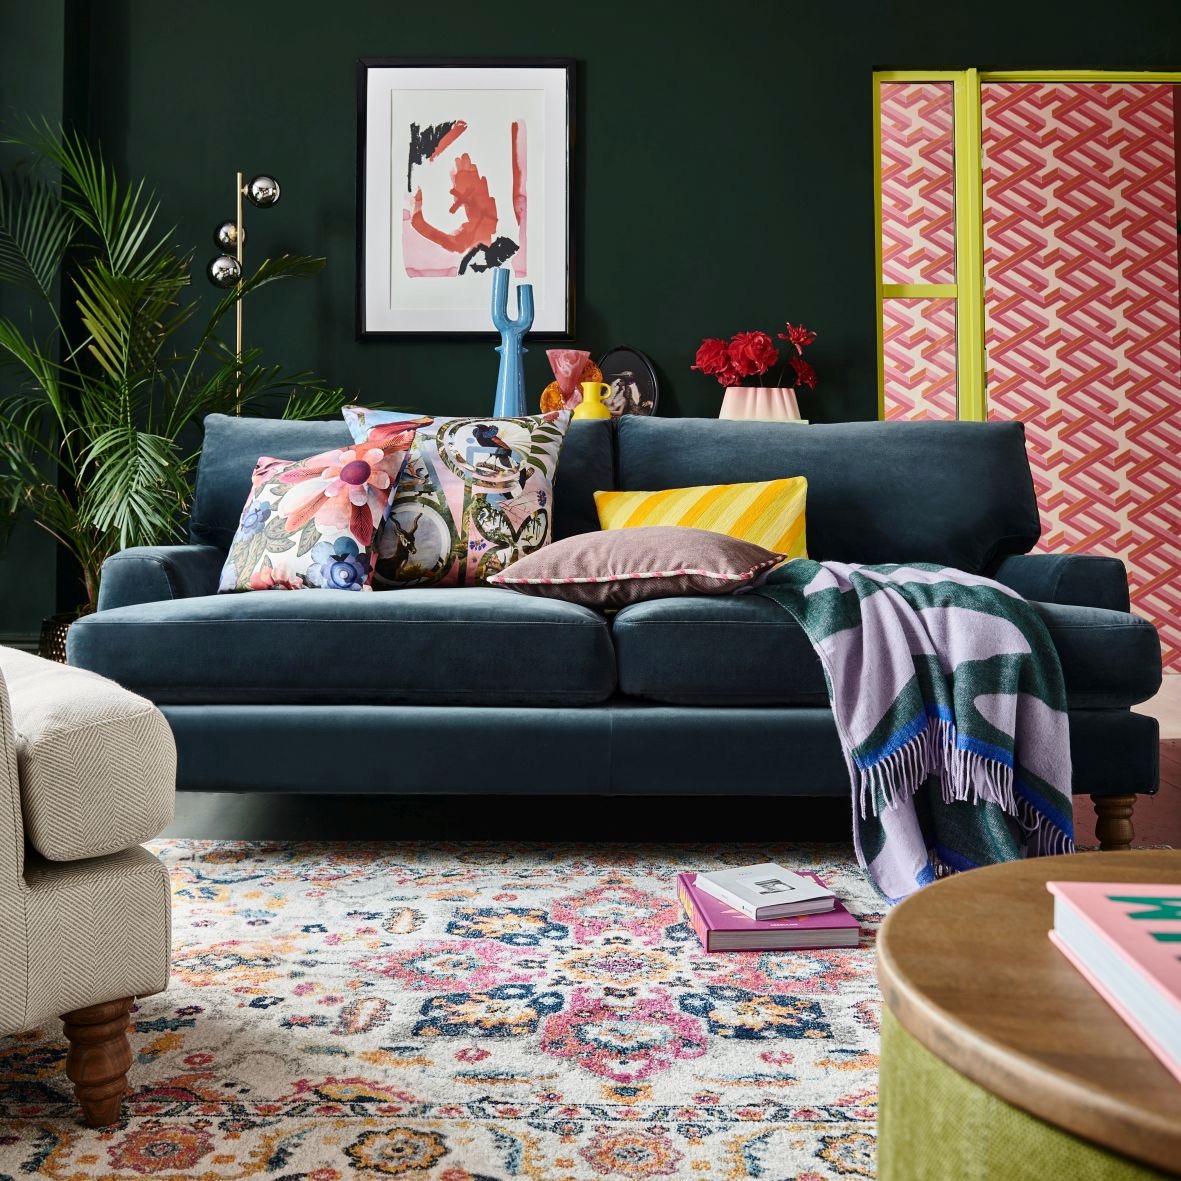 Green living room with blue velvet sofa and patterned rug